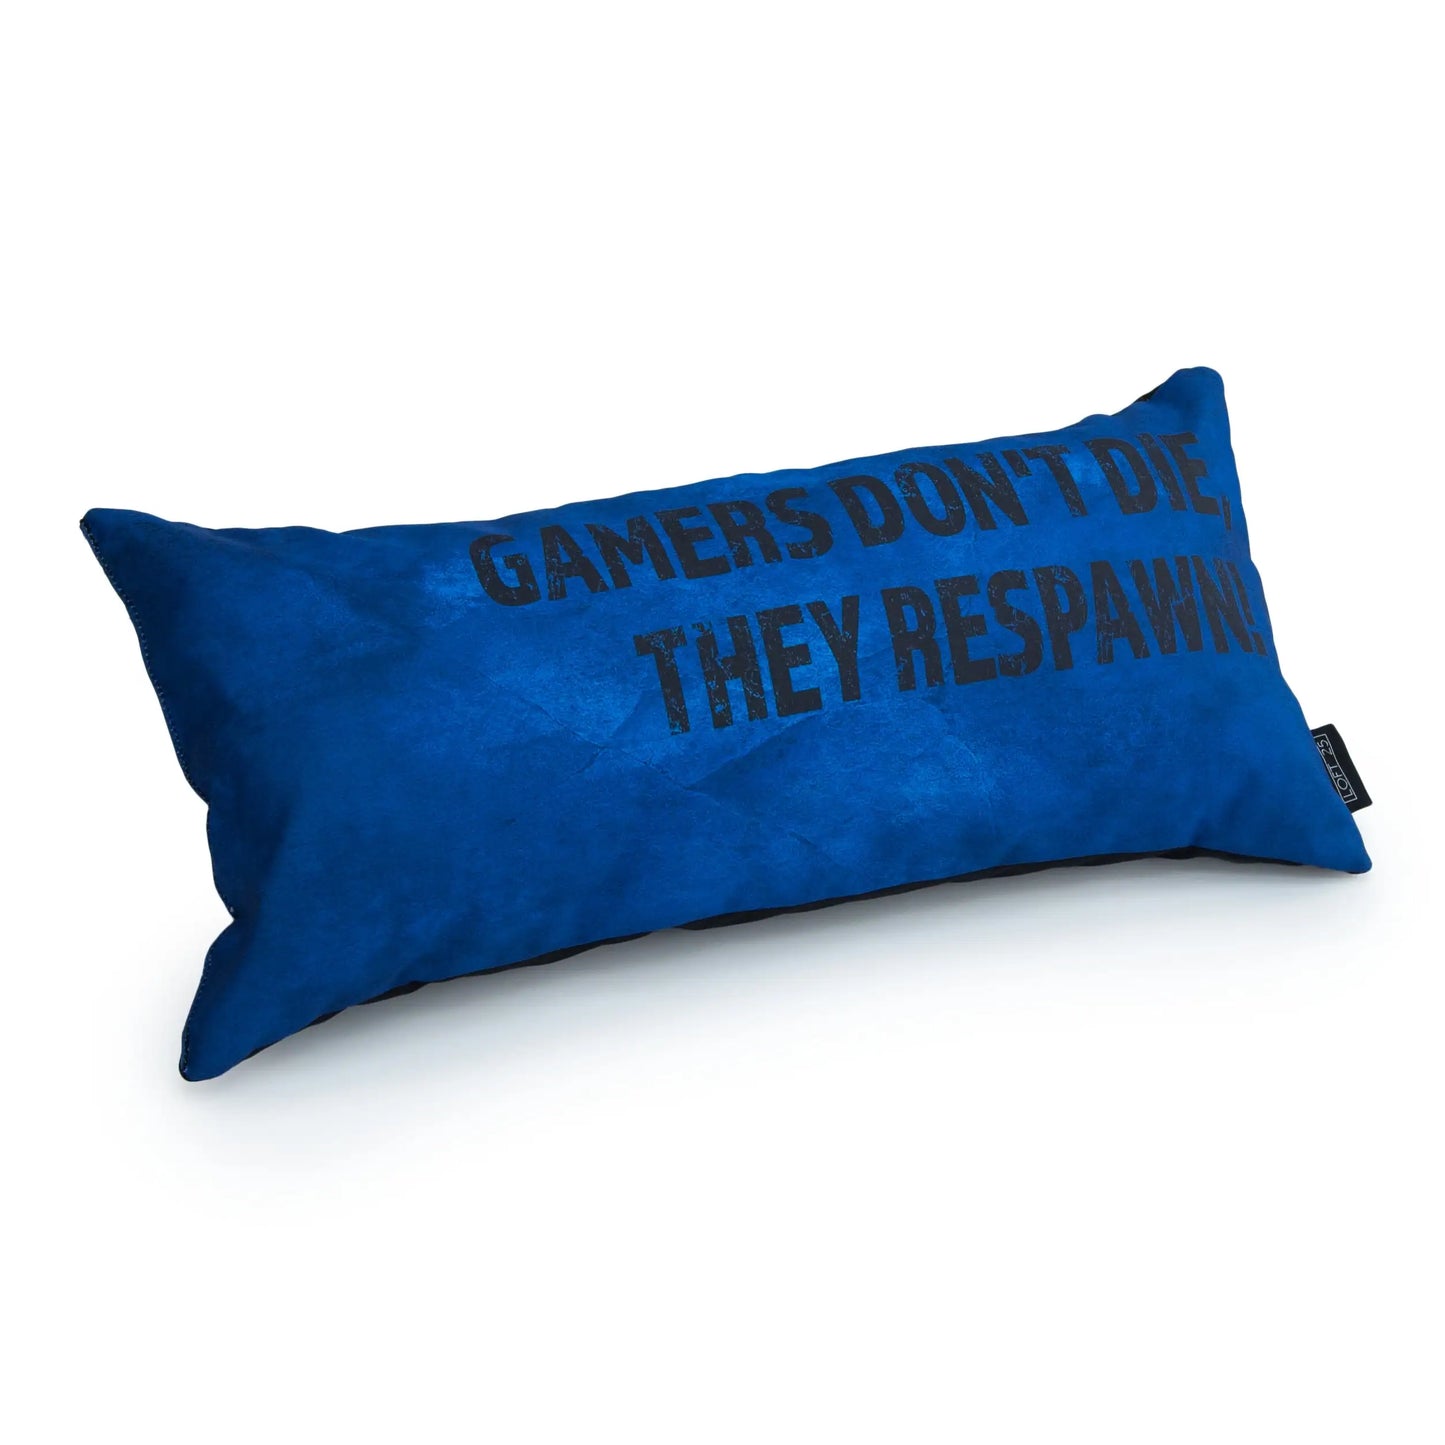 A gamer's pillow with a message of hope: "Gamers don't die, they respawn."